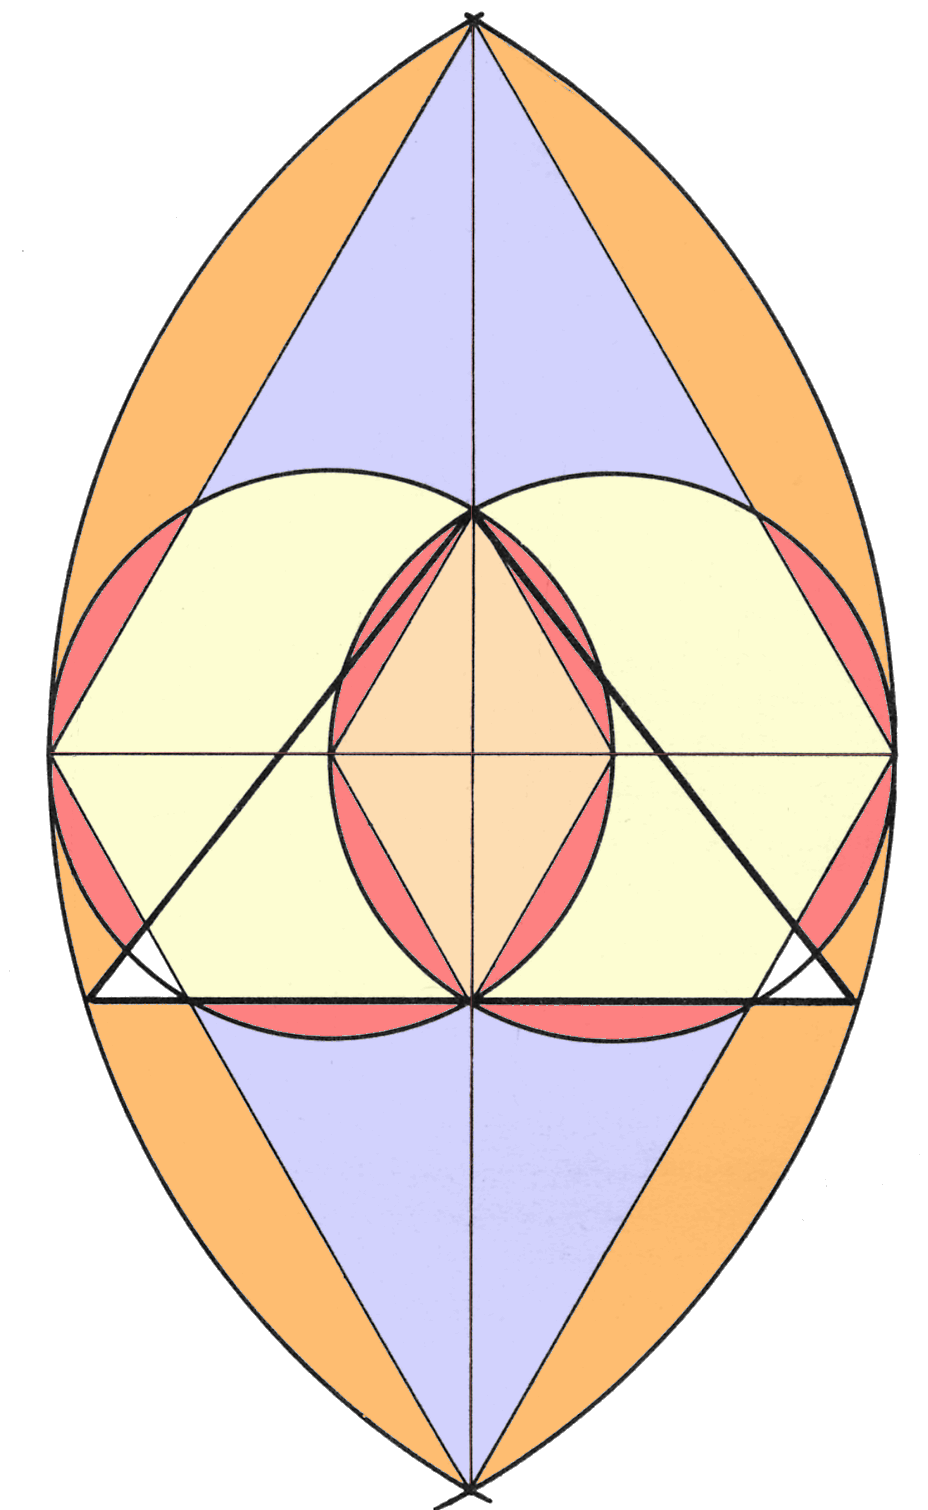 vesica pisces, pyramid, rhombus, randall carlson, sacred geometry, lecture, diagram, 7, isis,